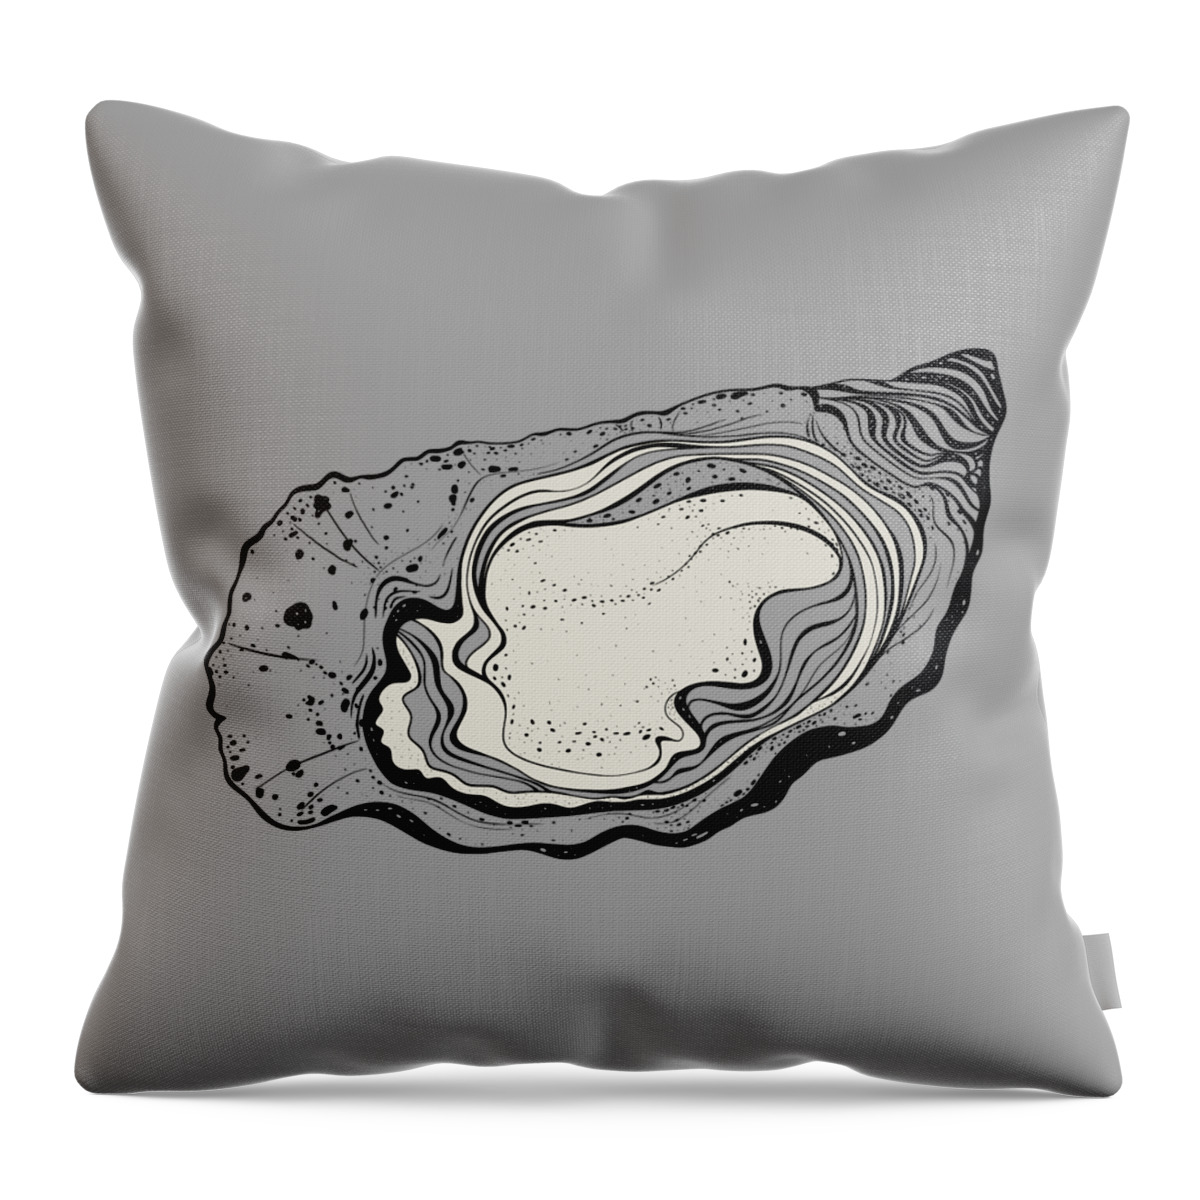 Animal Throw Pillow featuring the painting Oyster White by Tony Rubino